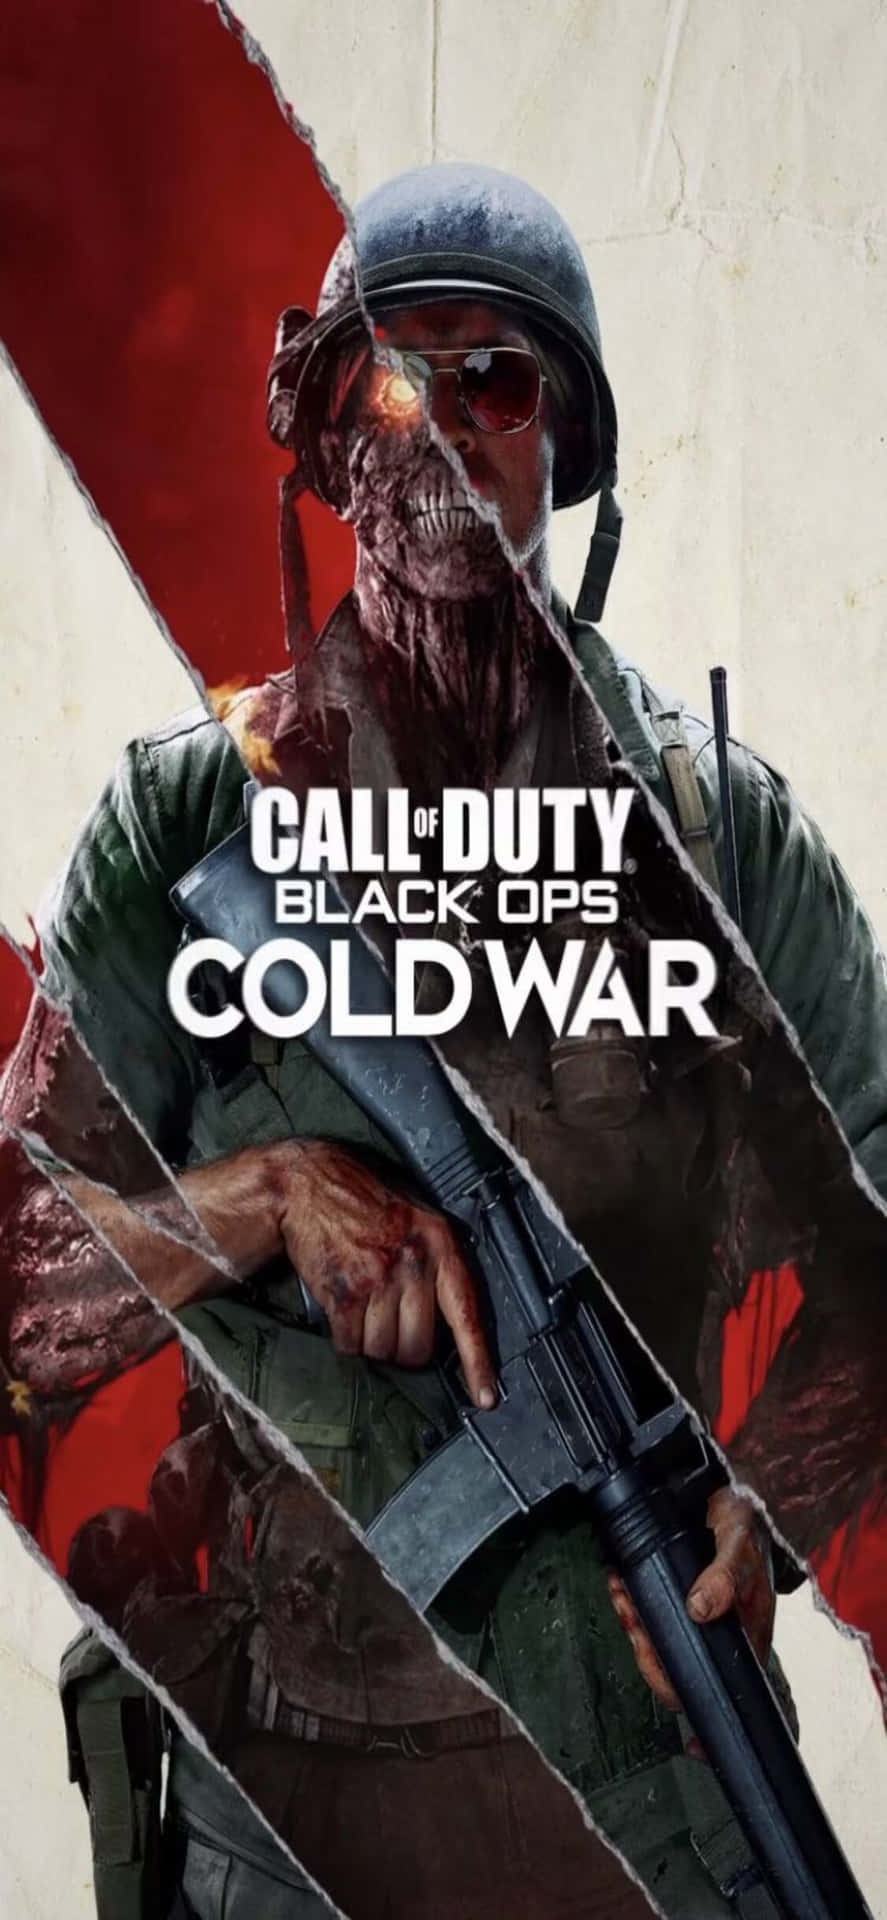 Iphonexs Bakgrund Med Call Of Duty Black Ops Cold War Zombies-poster.